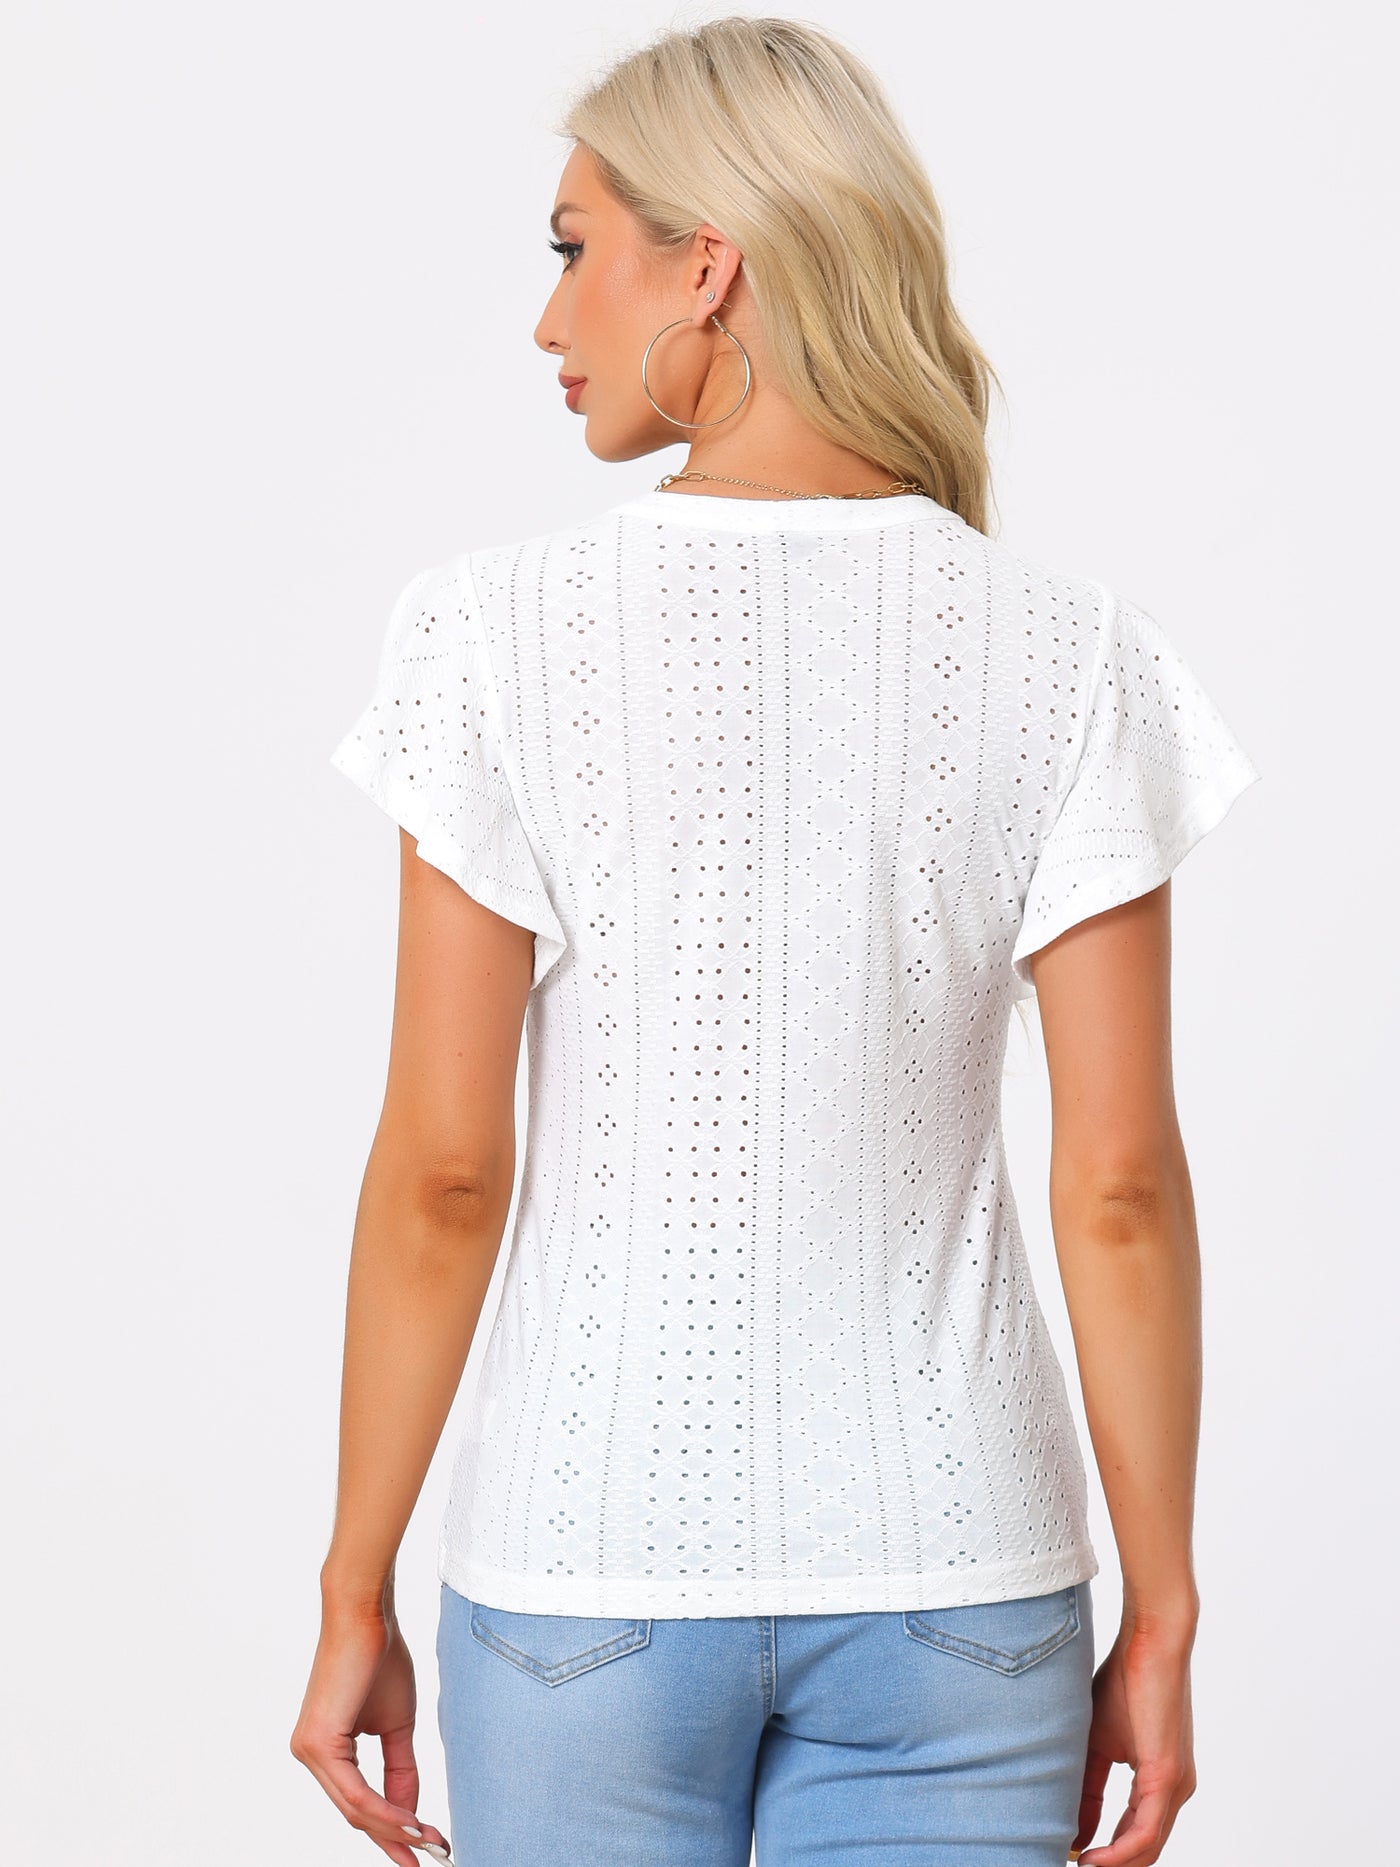 Allegra K Embroidered Eyelet Top Shirt V Neck Ruffle Sleeve Hollow Out Summer Country Tops